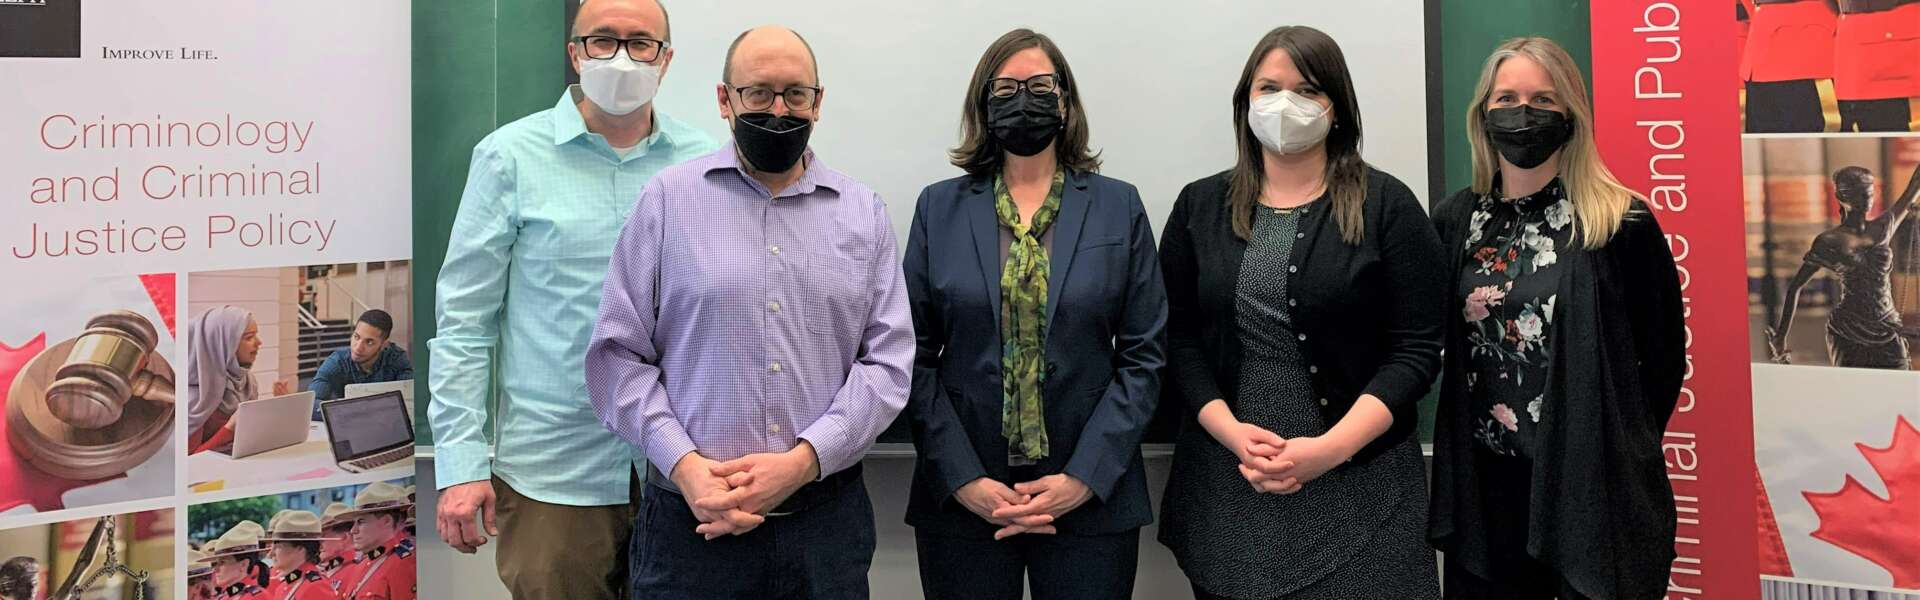 Five masked people stand in a row in front of a white board.